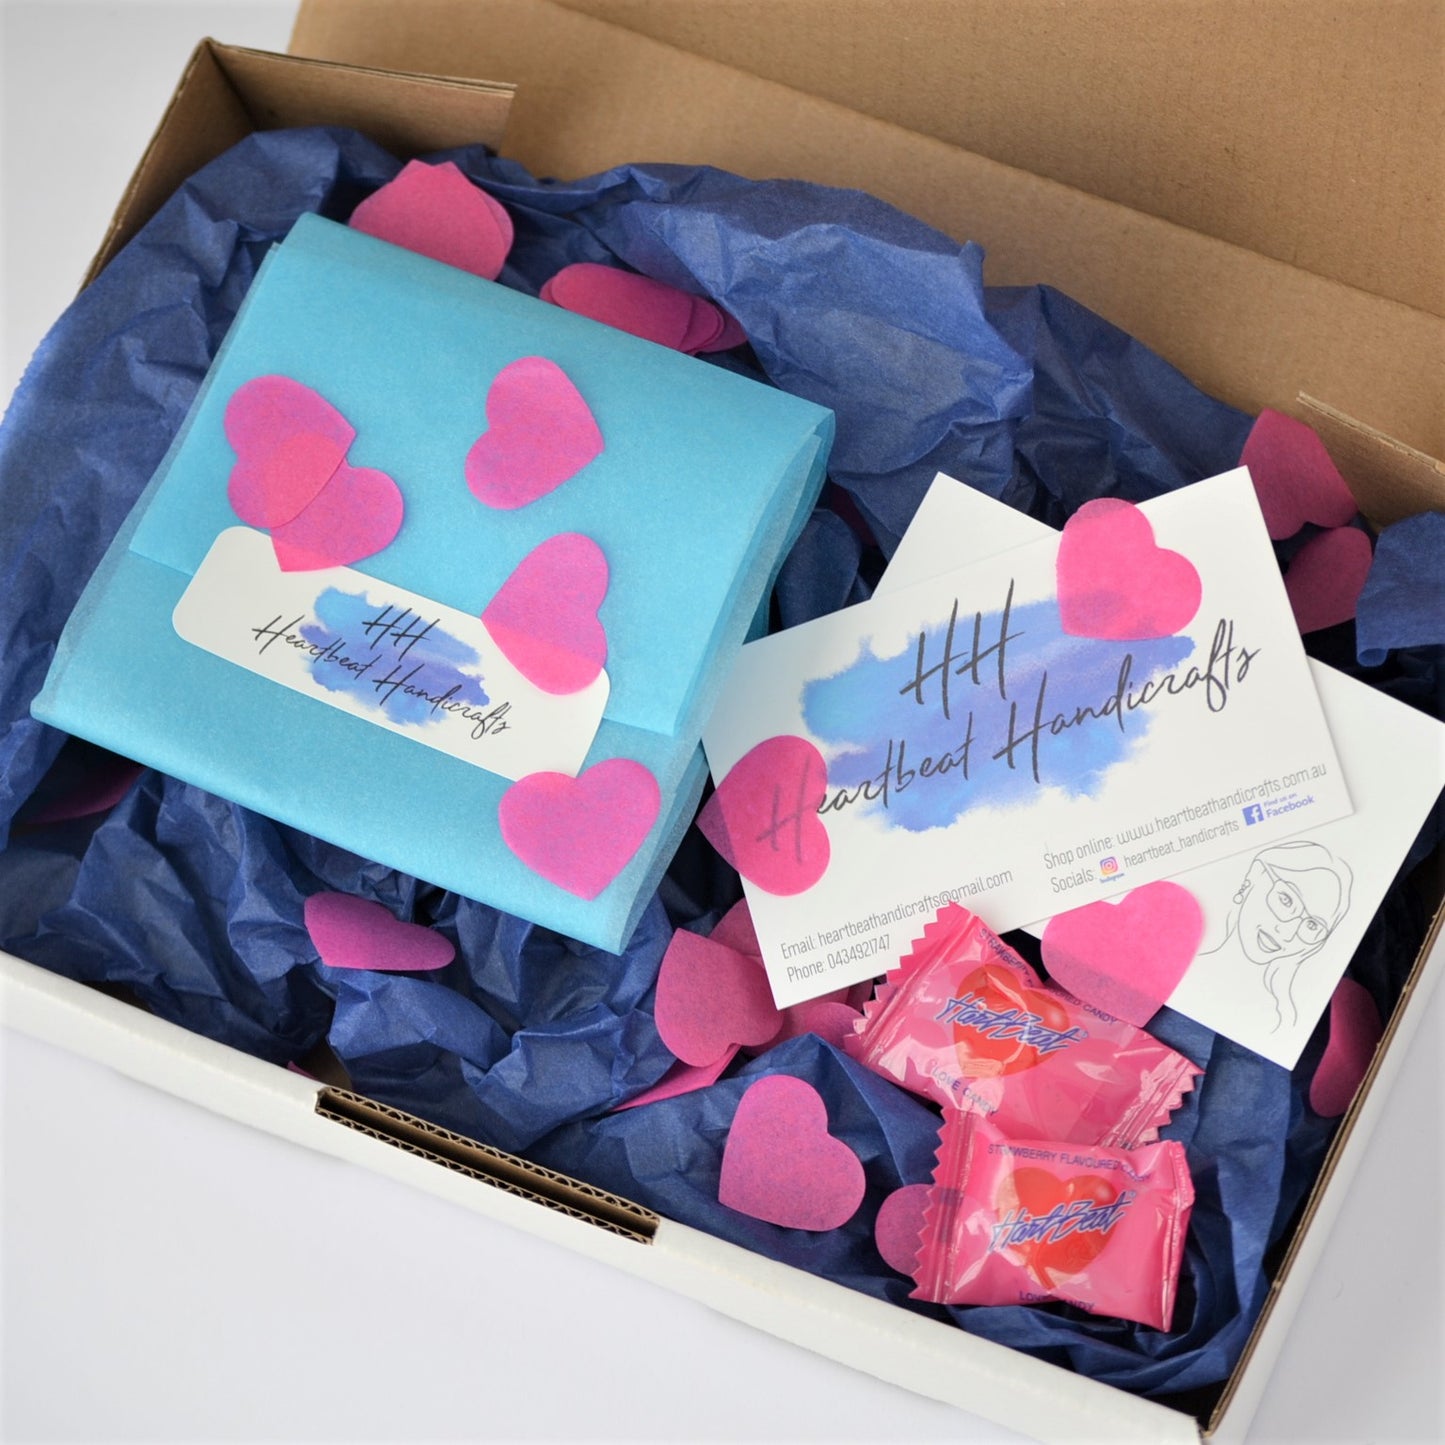 Example of packaging of earrings, showing blue tissue paper wrapping, pink heart-shaped confetti and a Heartbeat Handicrafts business card